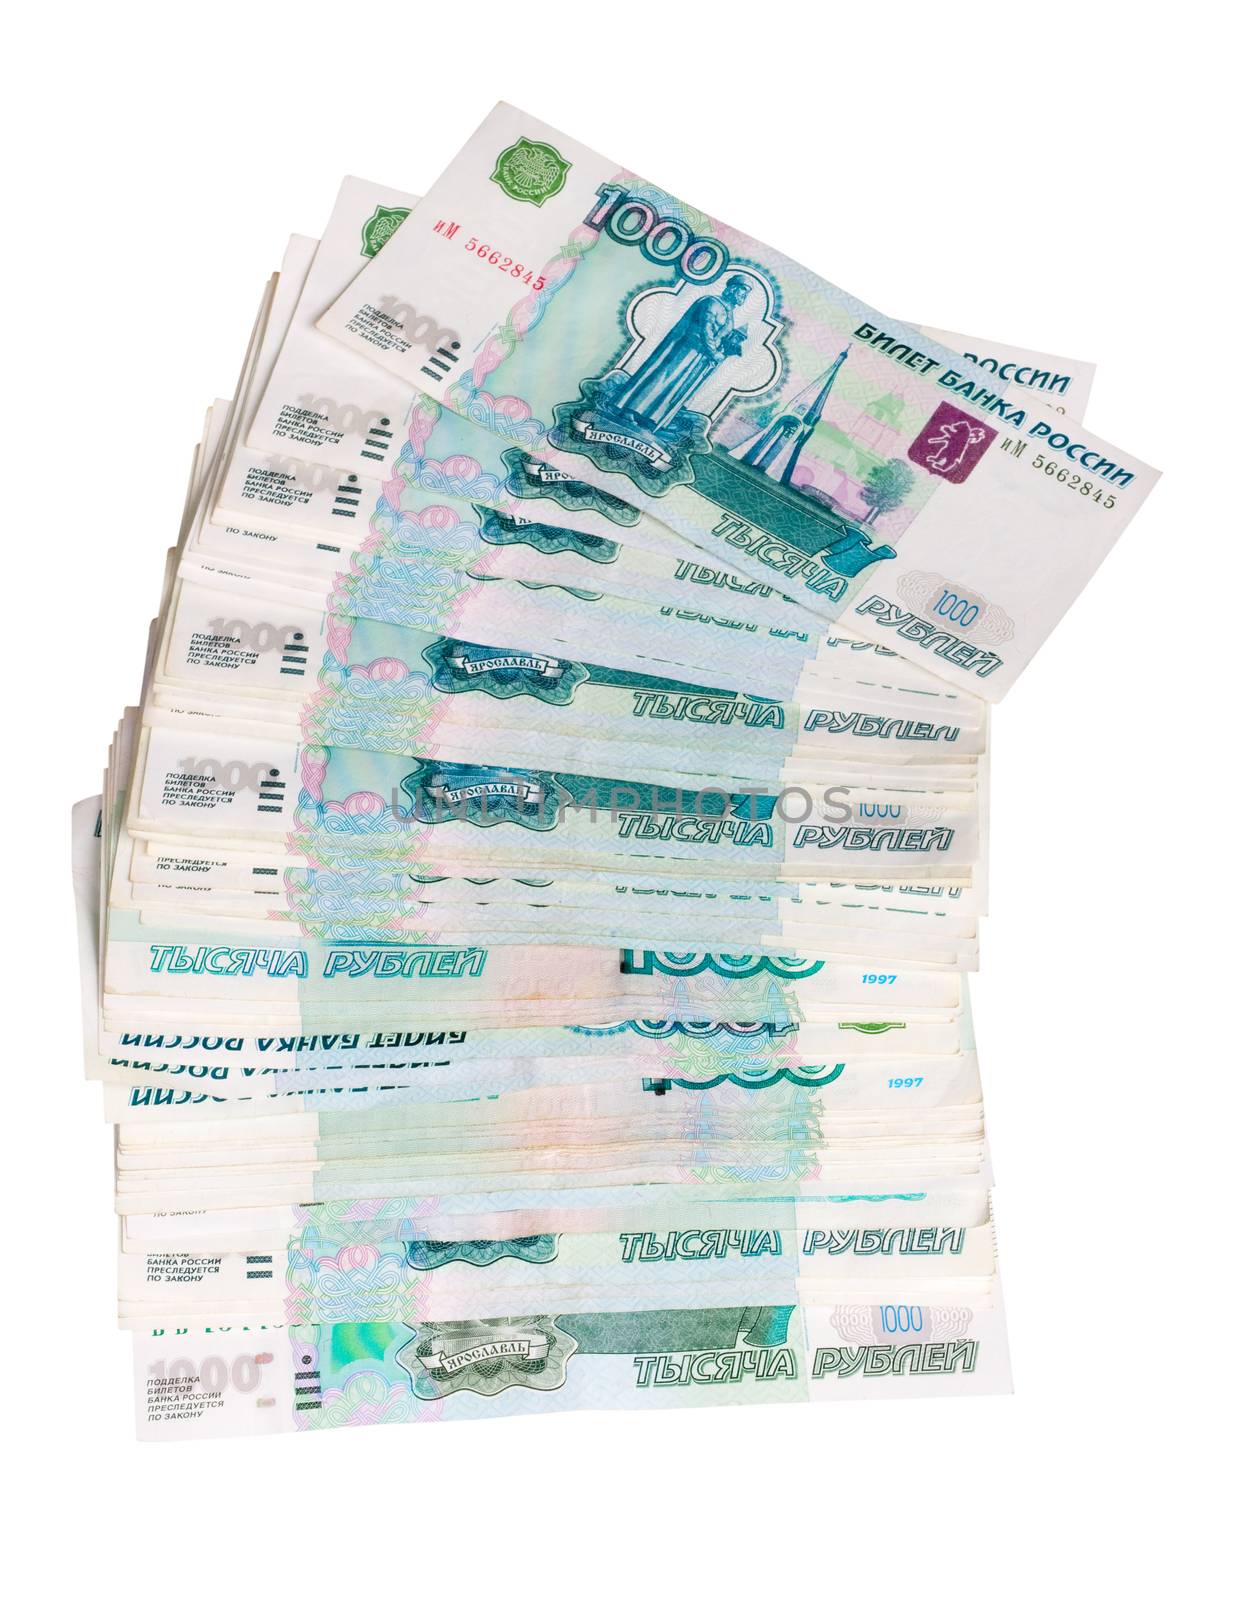 Russian money. One thousands rubles on a white background